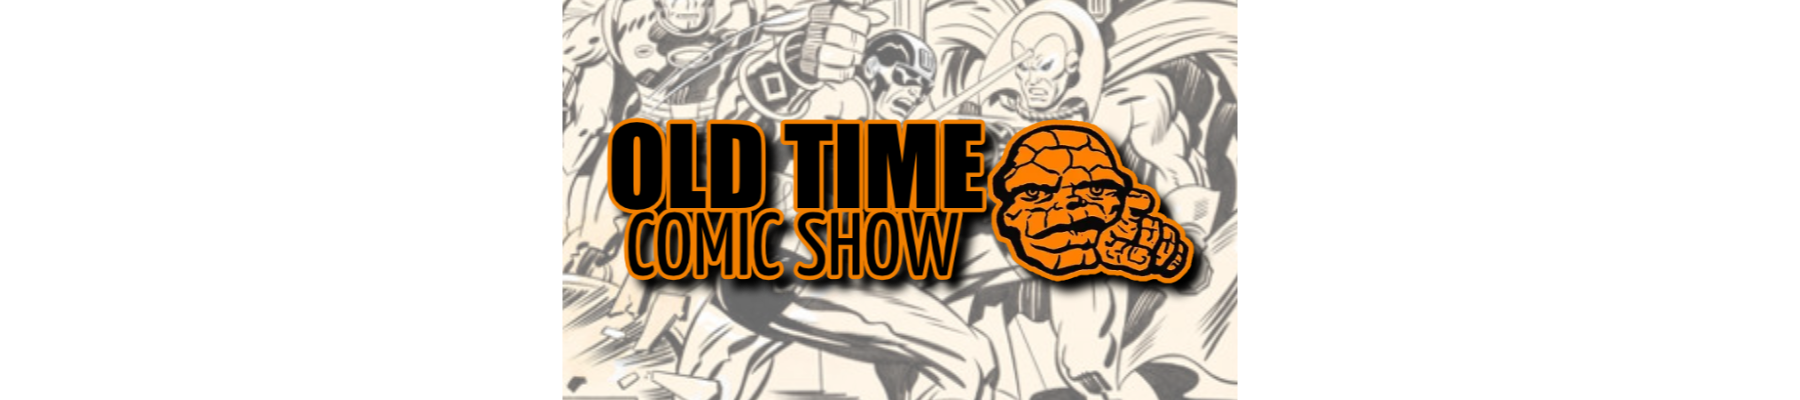 The "Old Time Comic Show" is coming!